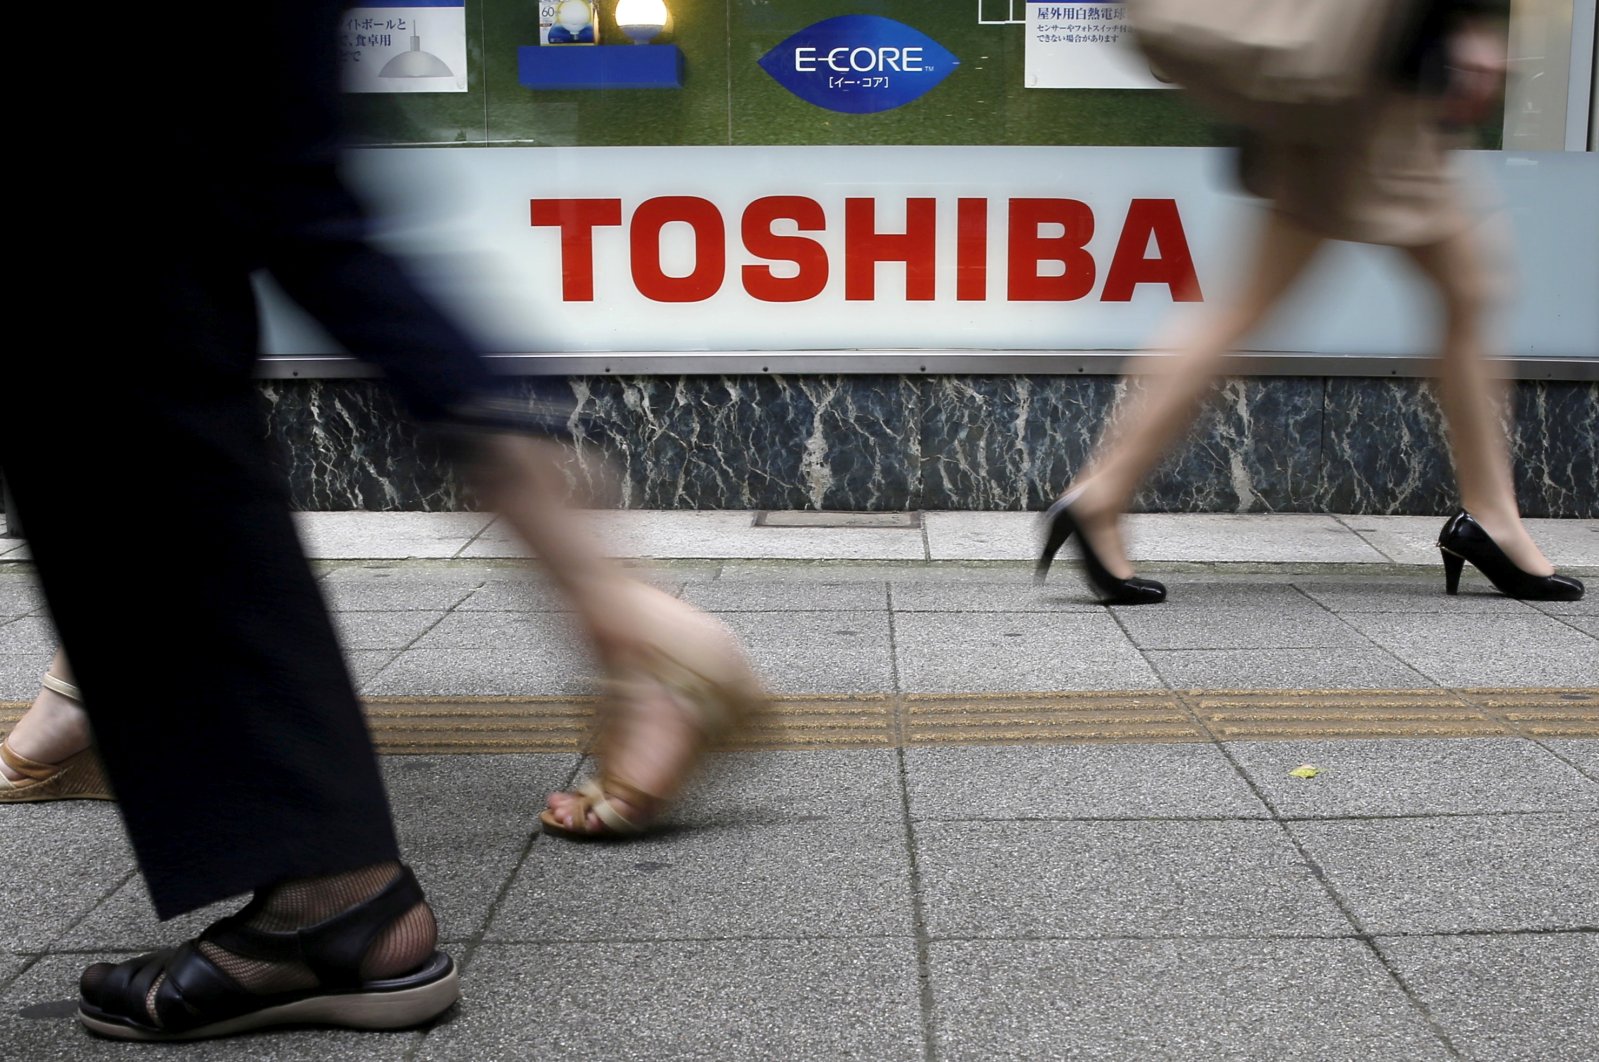 Pedestrians walk past a logo of Toshiba Corp outside an electronics retailer in Tokyo, Japan, Sept. 14, 2015. (Reuters Photo)